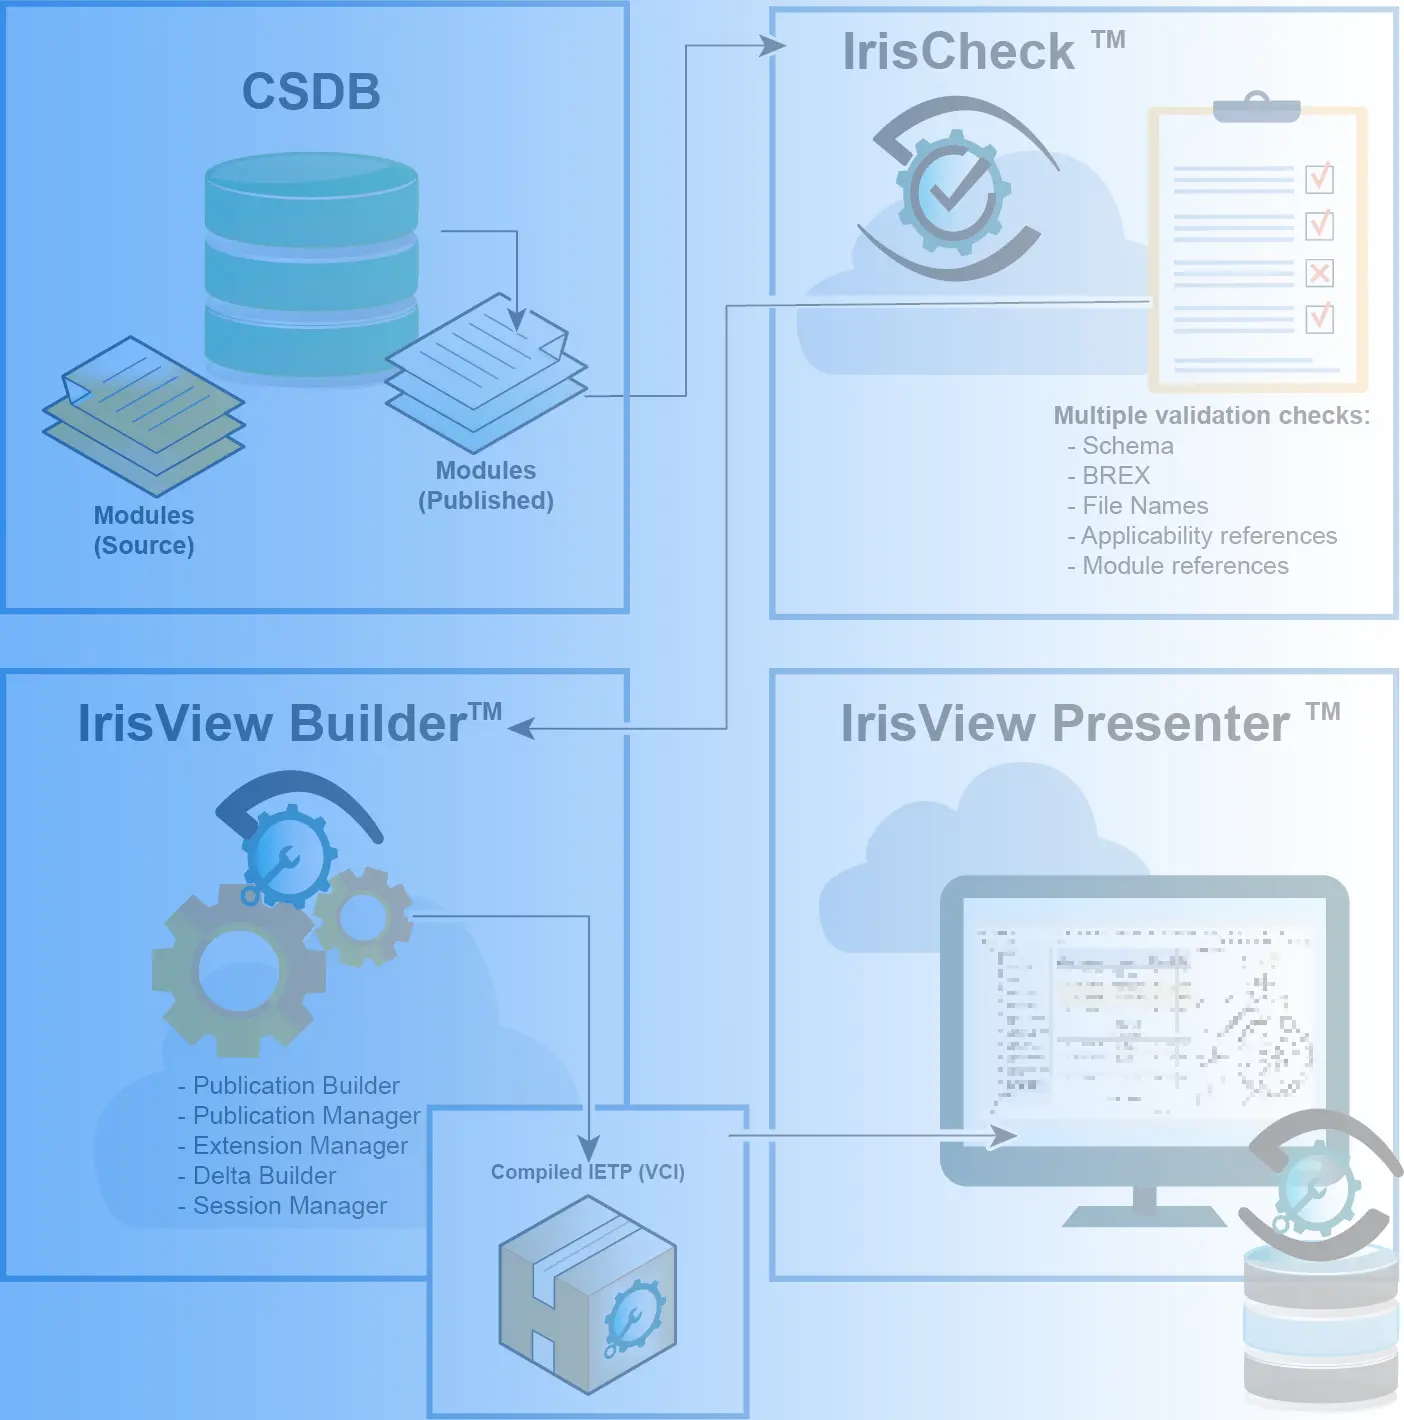 Flowchart Describing How Iris Software Suite Tools Interconnect From CSDB to IrisCheck to IrisView Builder to IrisView Presenter So You Can View and Execute IETPs